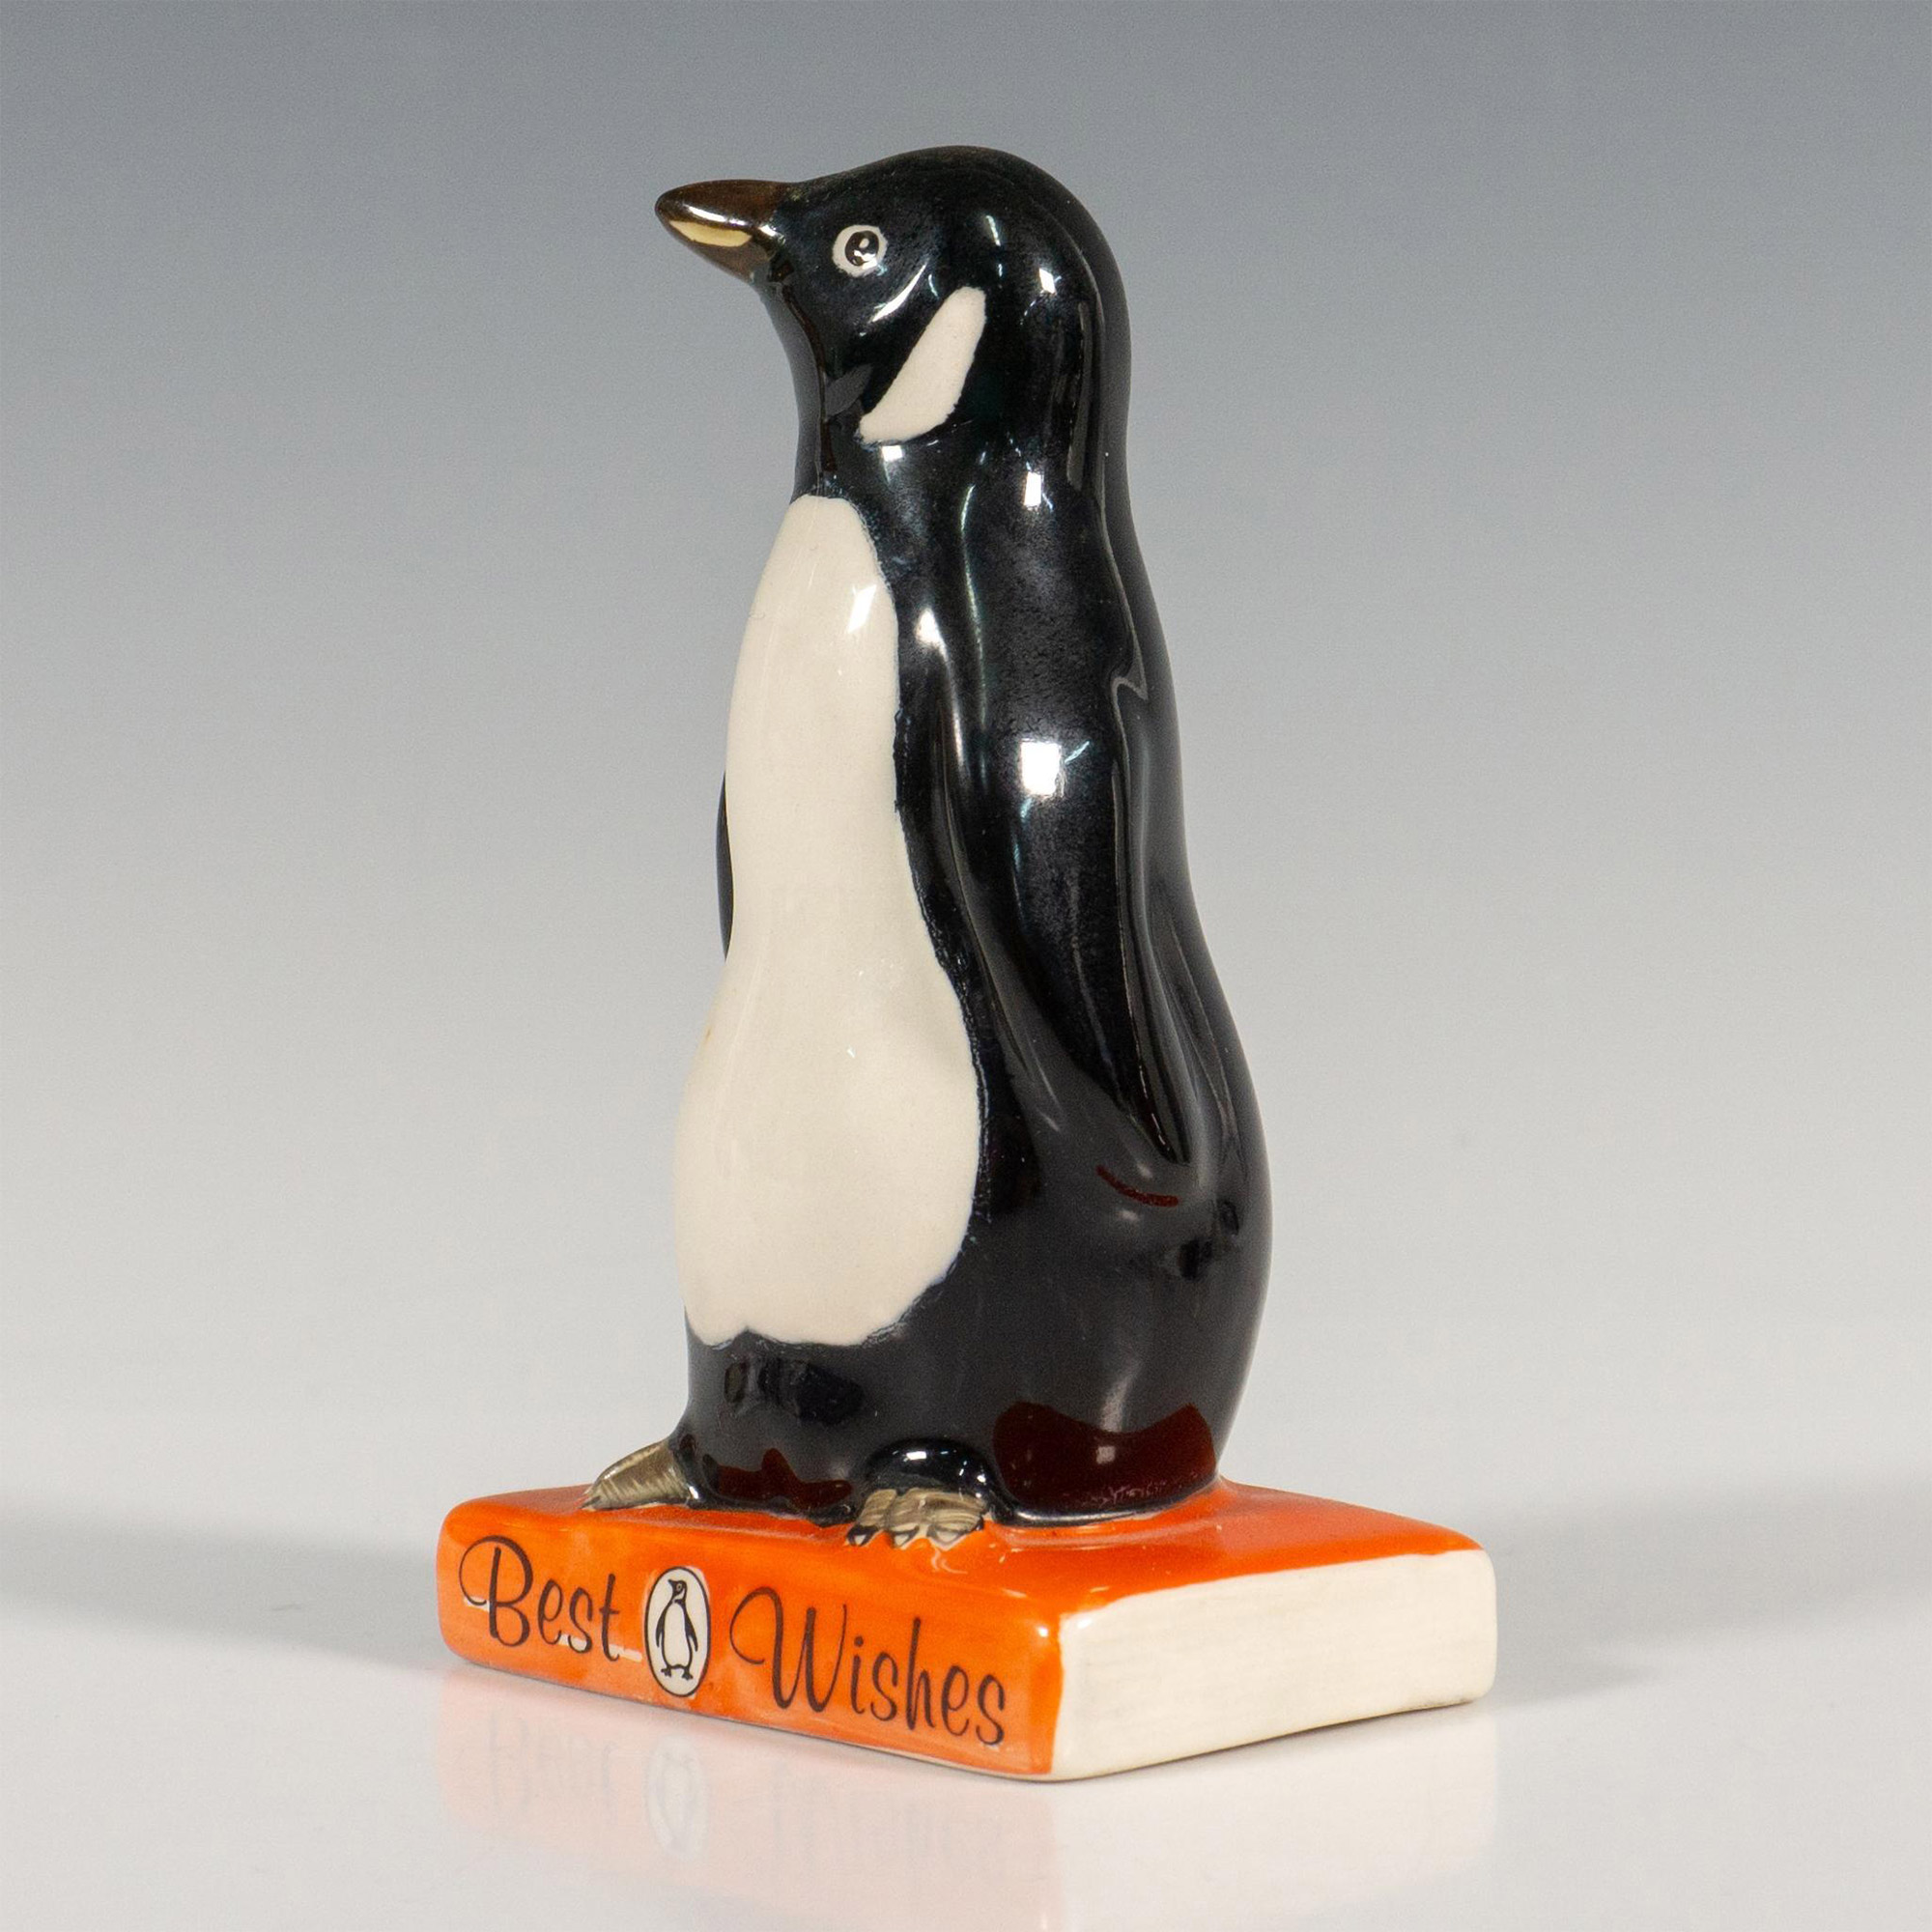 Best Wishes Penguin - Royal Doulton Advertising Figurine - Image 2 of 5